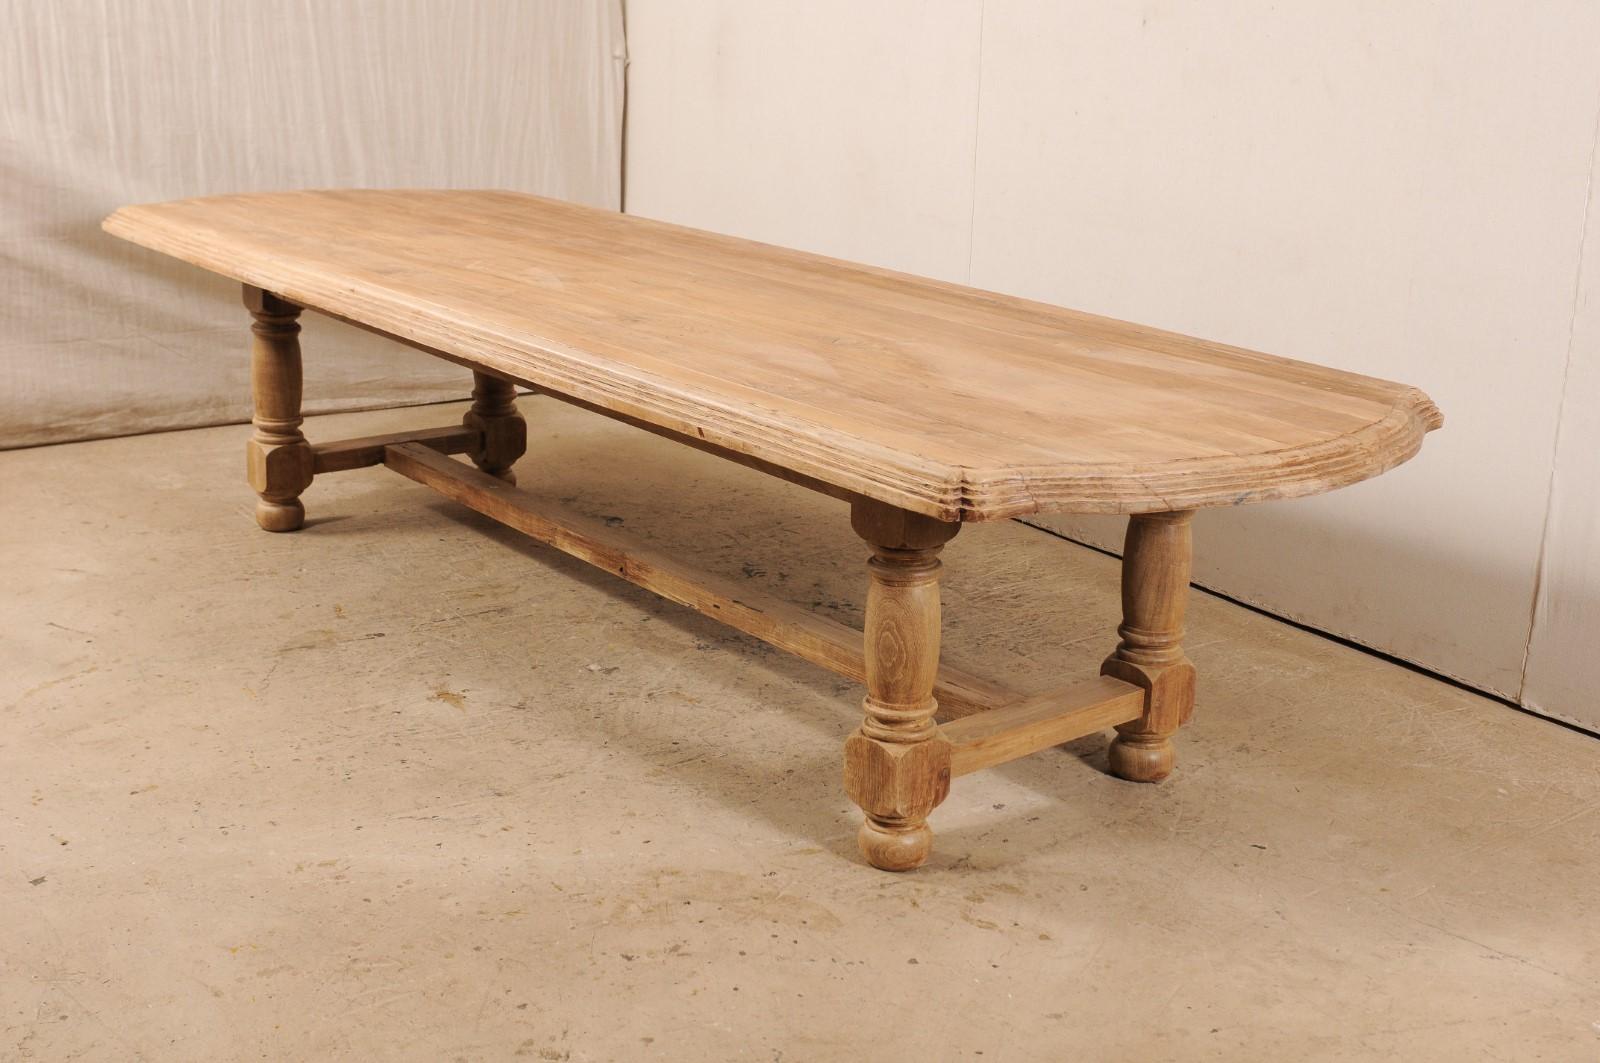 A 19th C. Anglo-Indian Light Teak Wood Dining Table w/Robust Legs, 11+ Ft Long 1